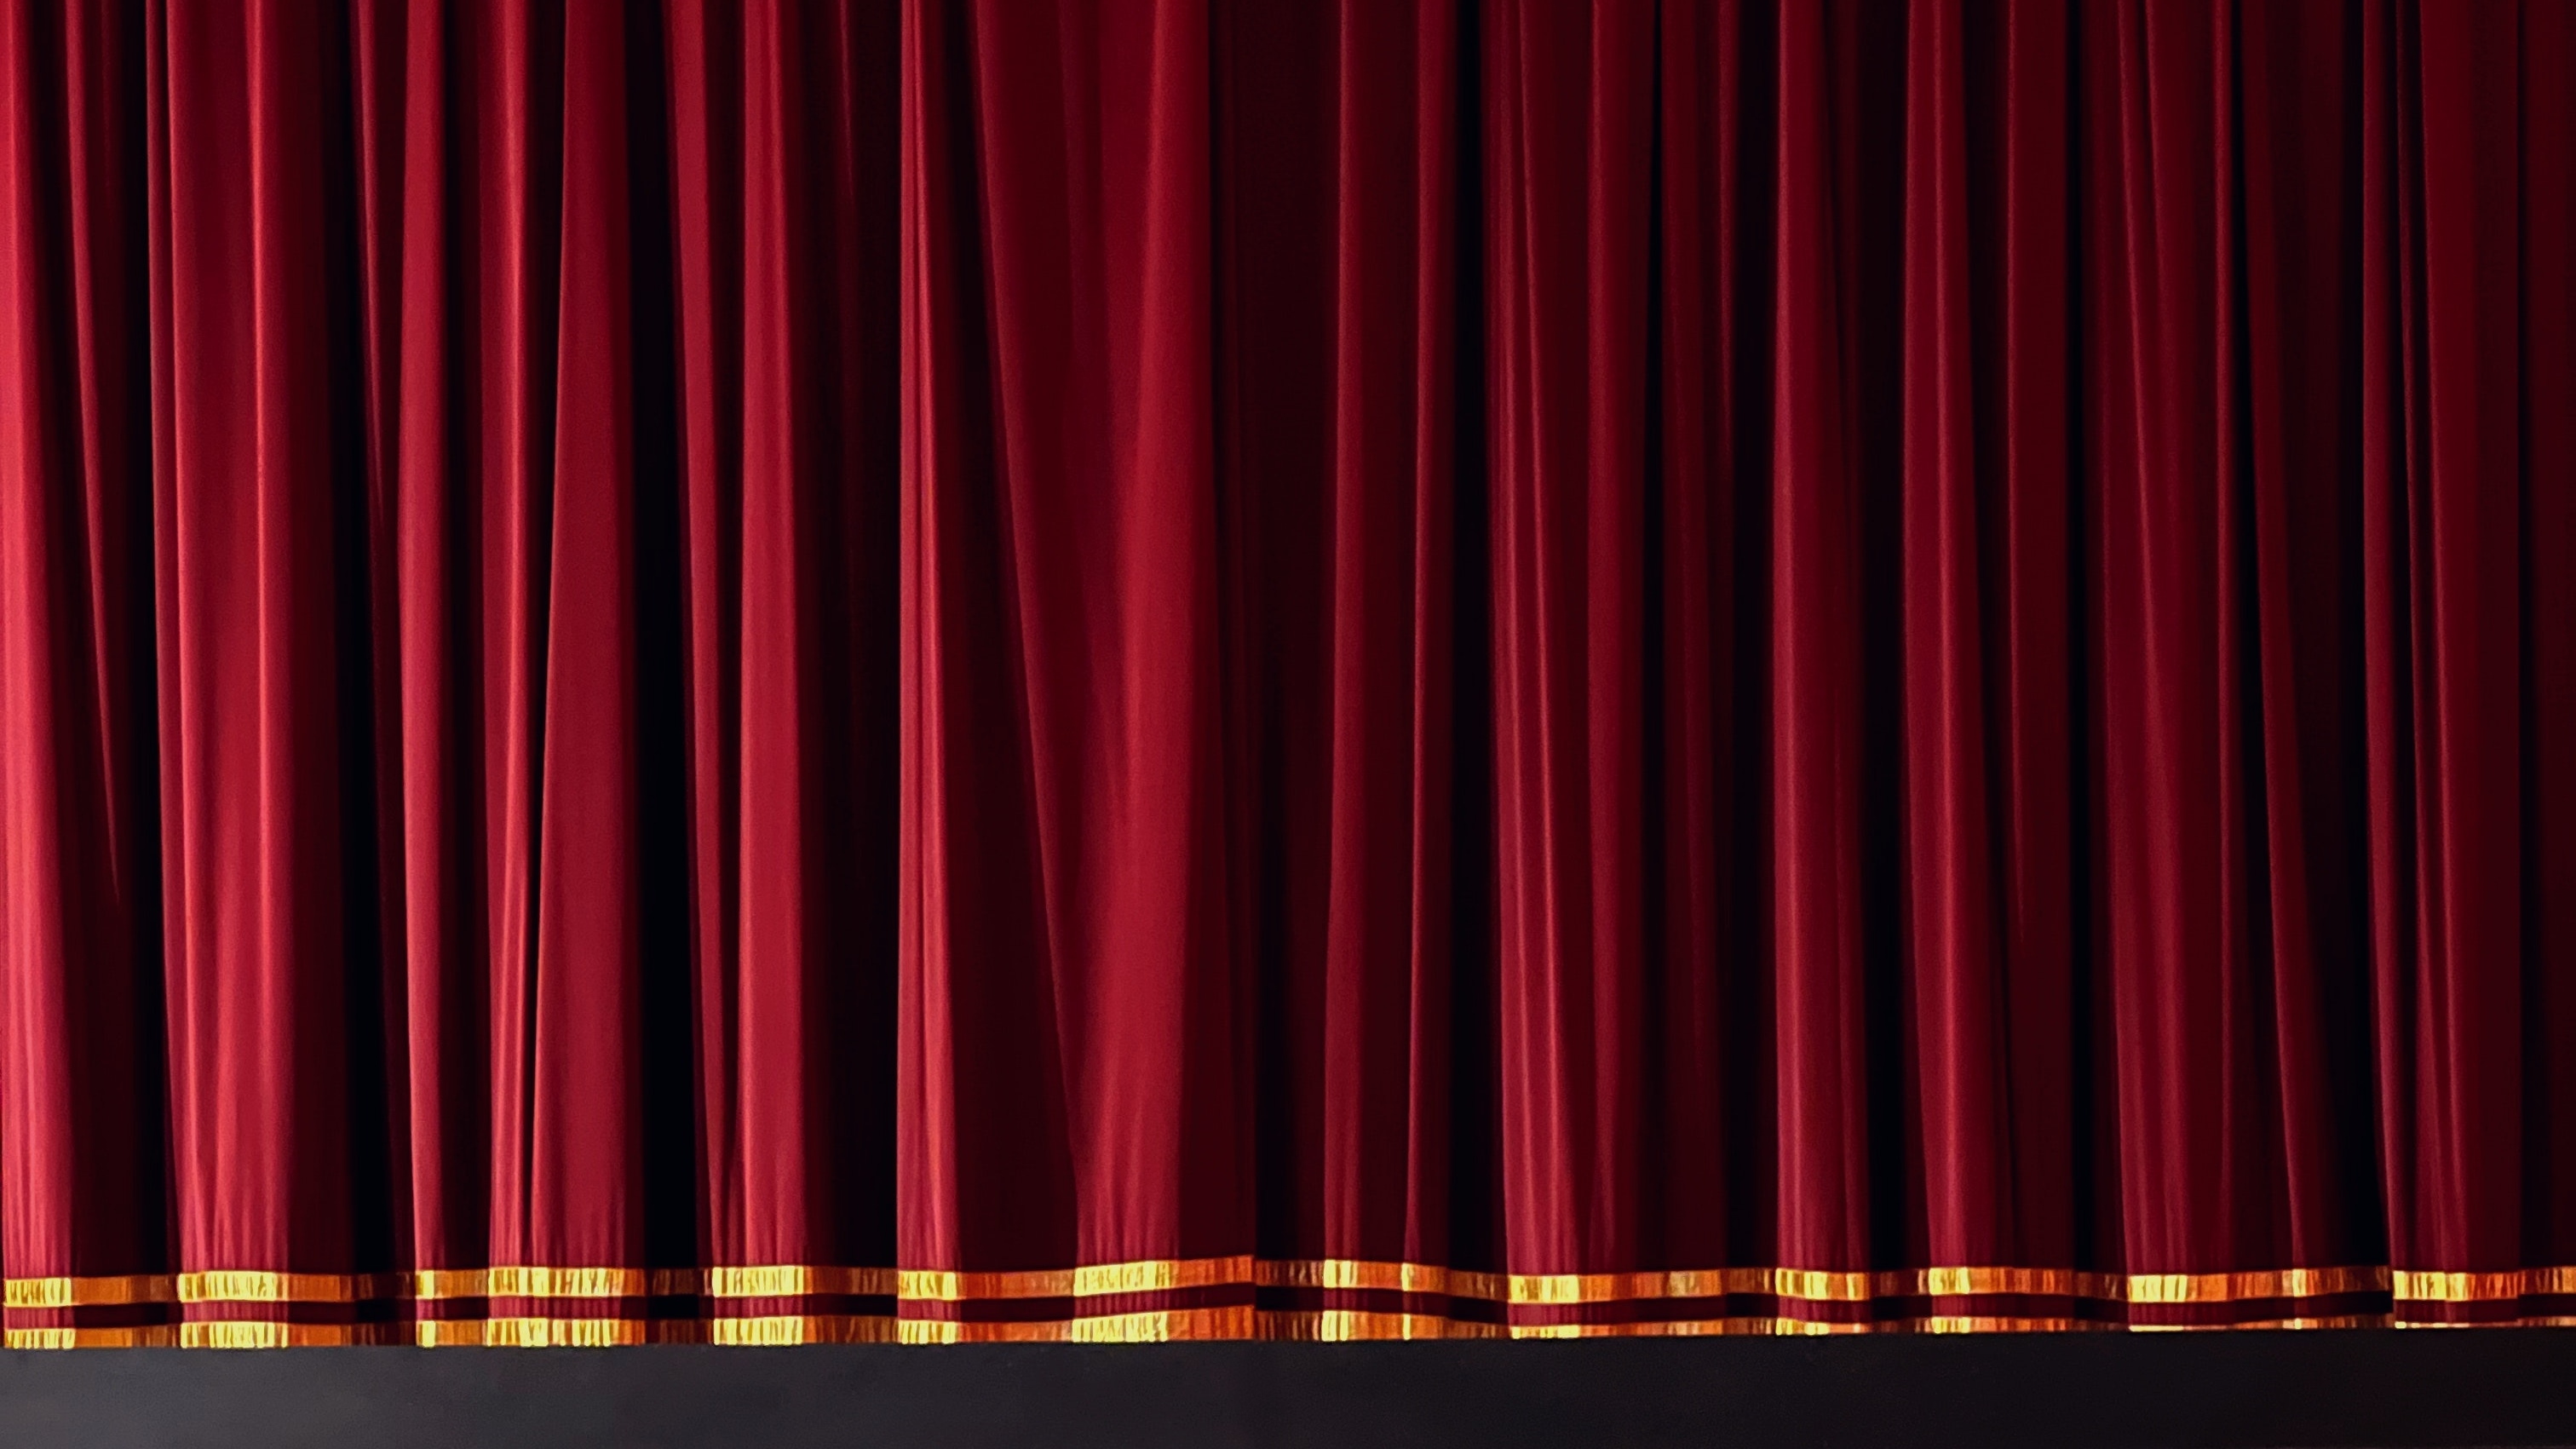 Curtains Background Images HD Pictures and Wallpaper For Free Download   Pngtree